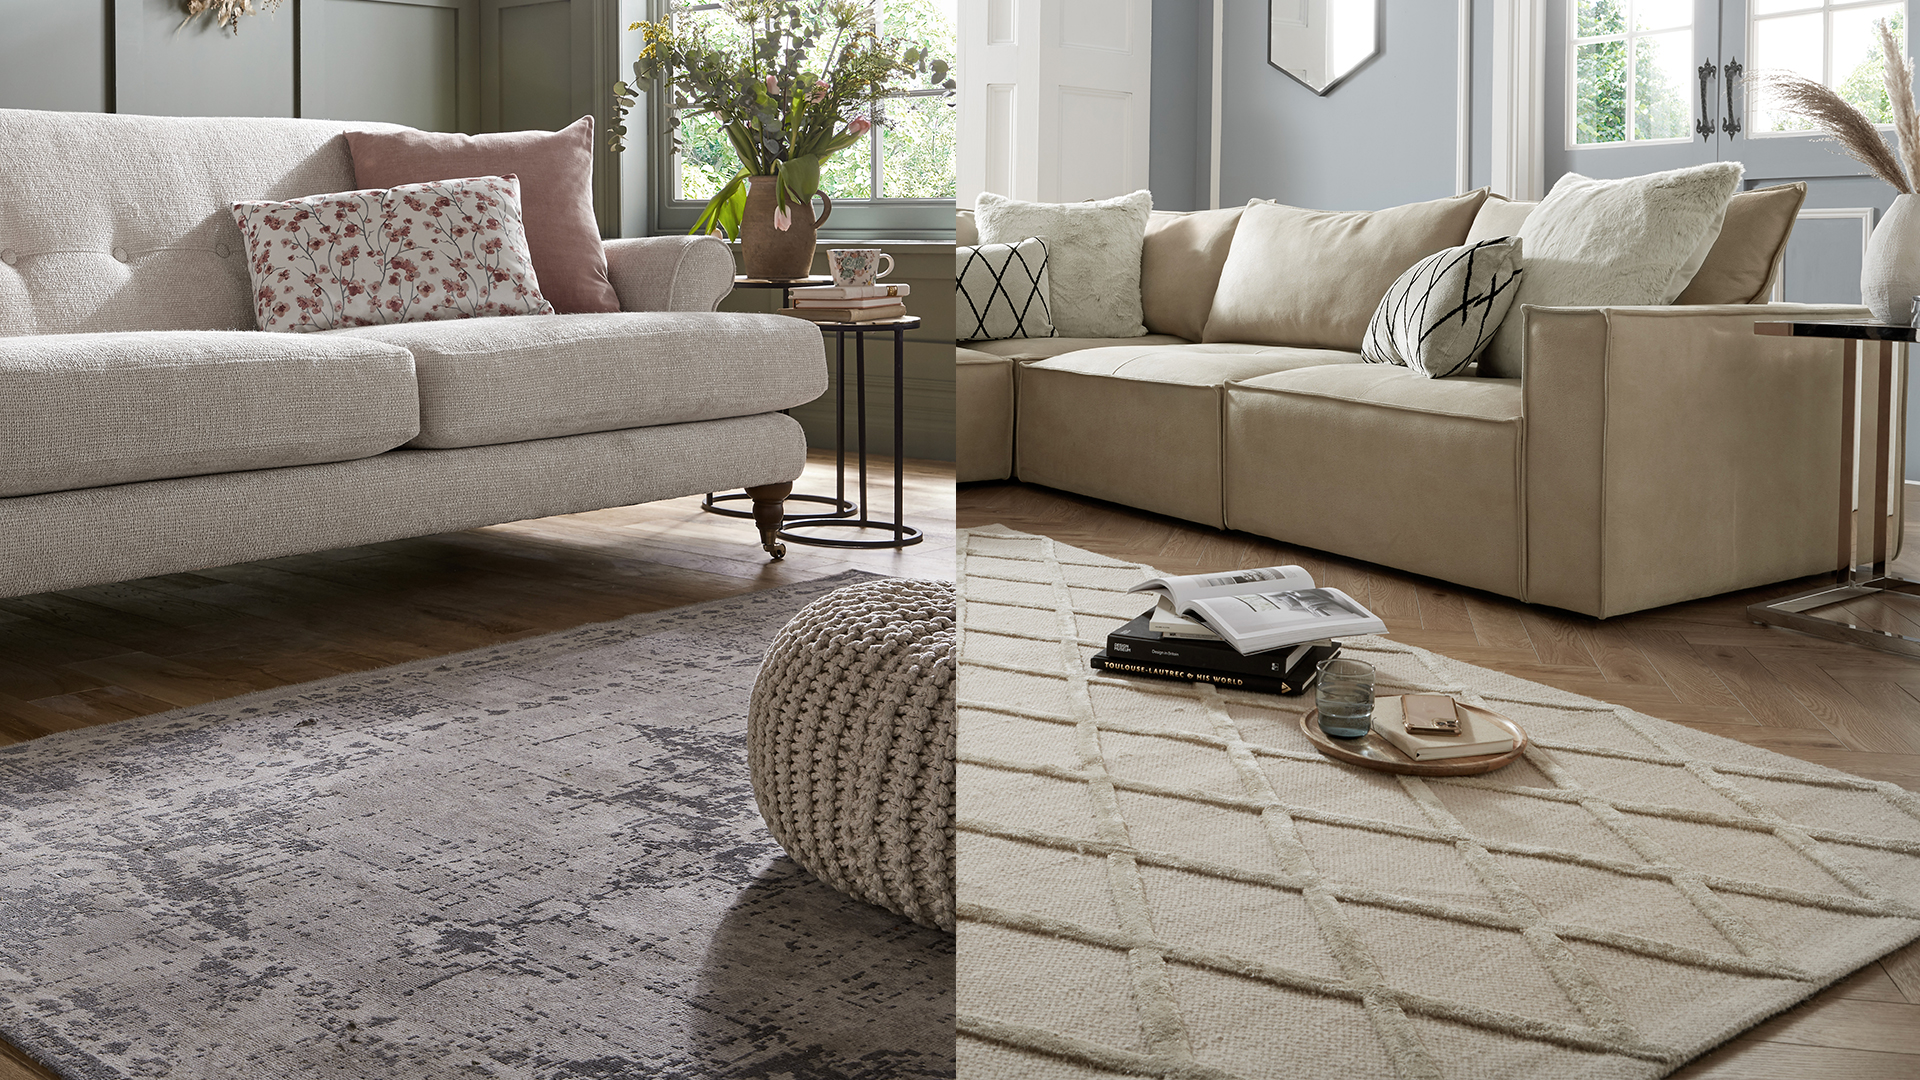 Refresh your home for spring with Sofology’s stylish new sofa designs